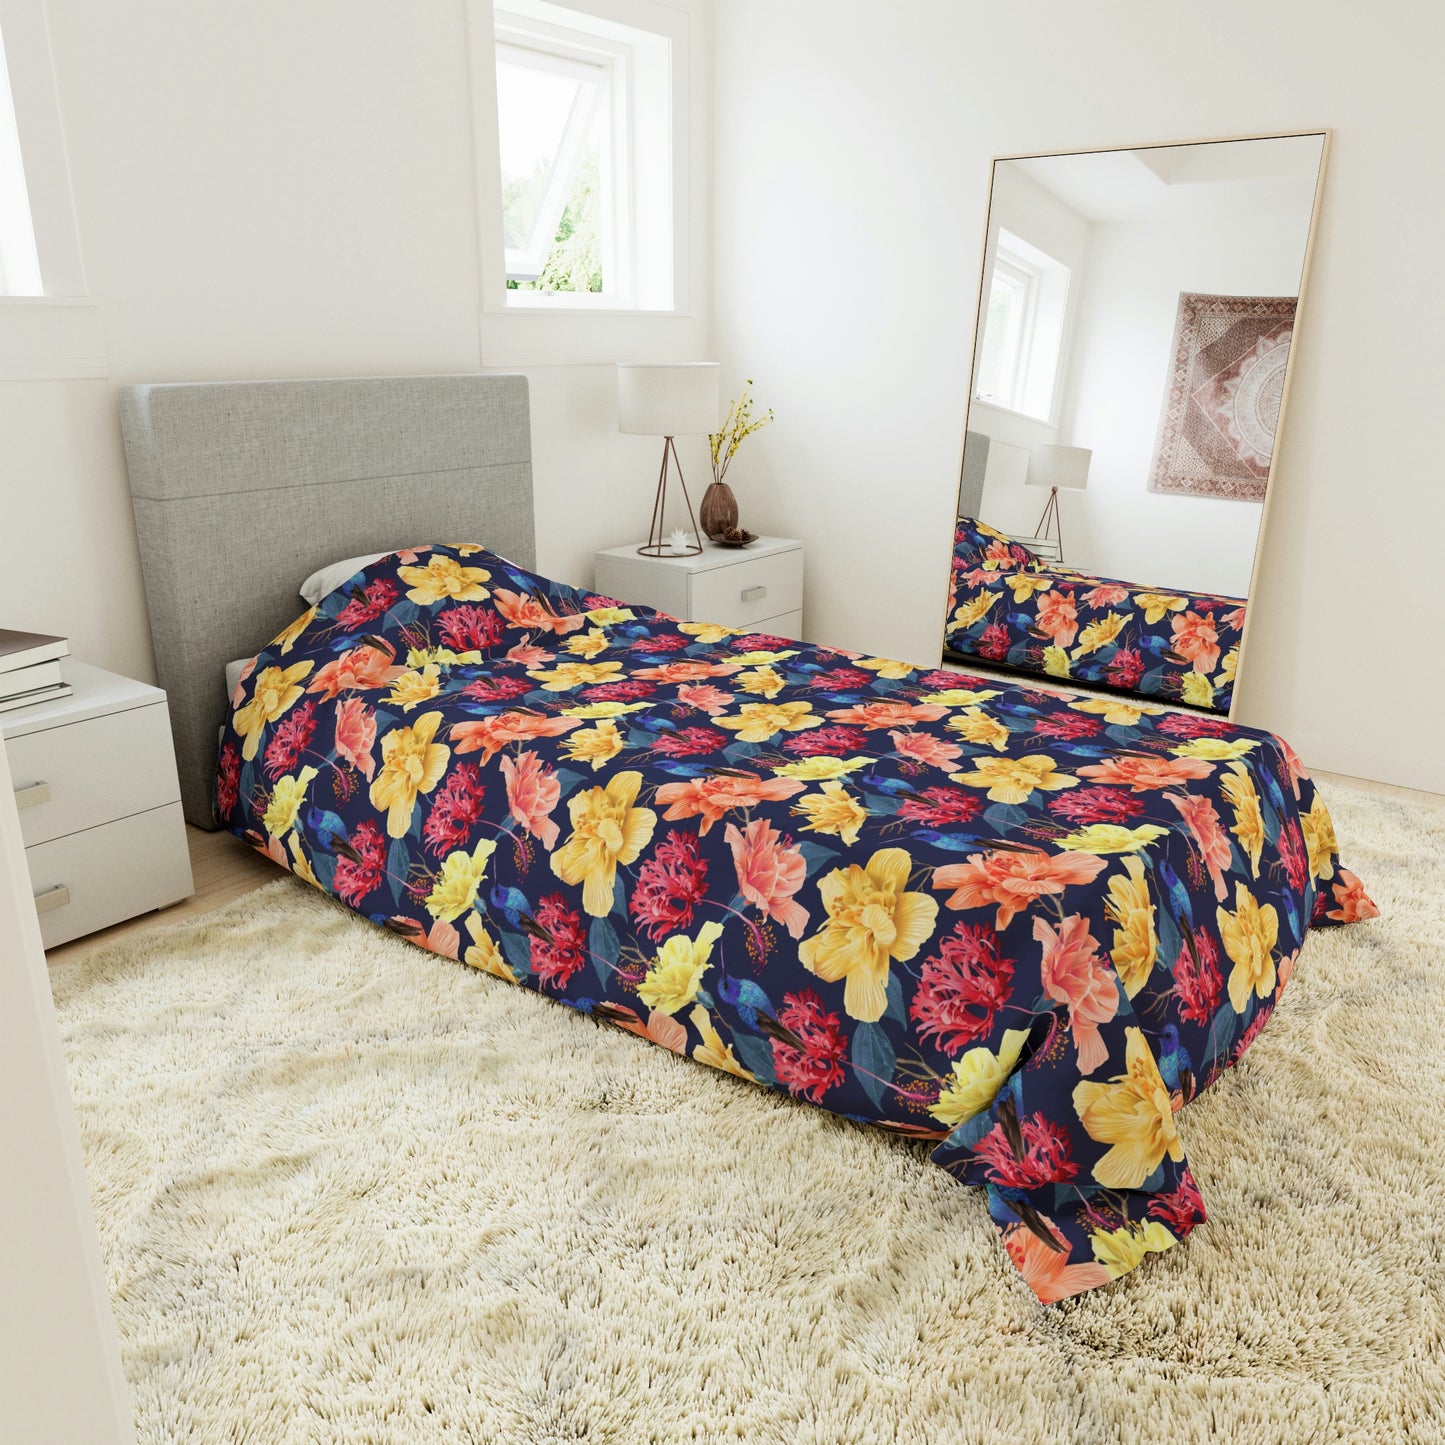 Bold Colorful Blue yellow and red Floral Pattern Duvet lying on a bed, microfiber floral duvet cover bedroom accent